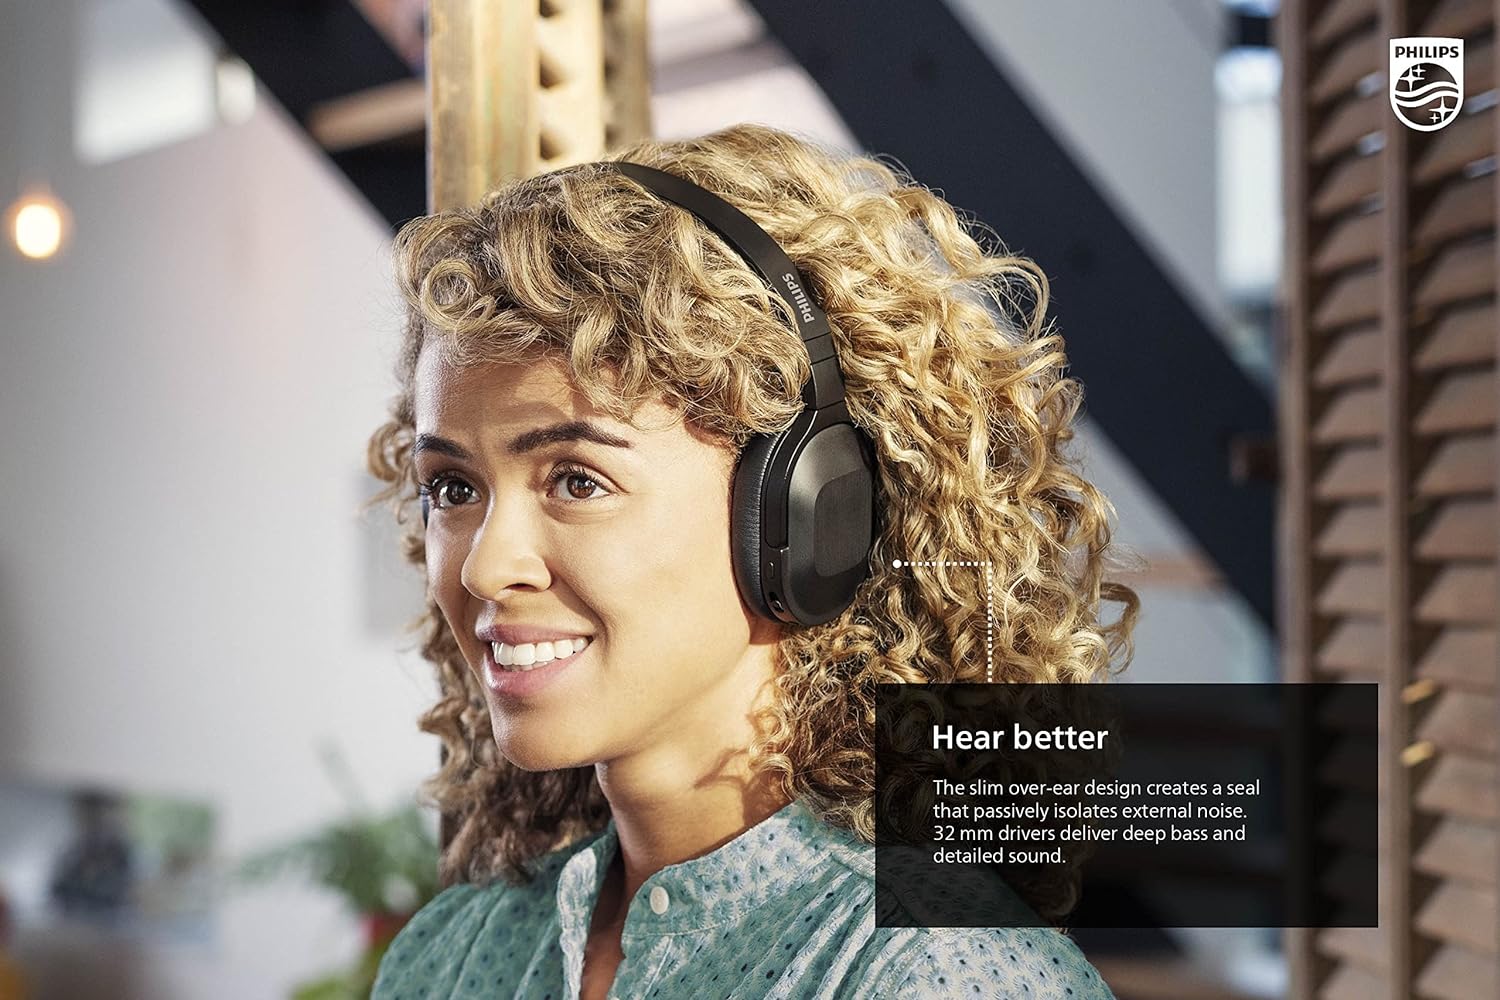 Philips H6506 On-Ear Wireless Headphones with Active Noise Canceling (ANC) and Multipoint Bluetooth Connection, TAH6506BK